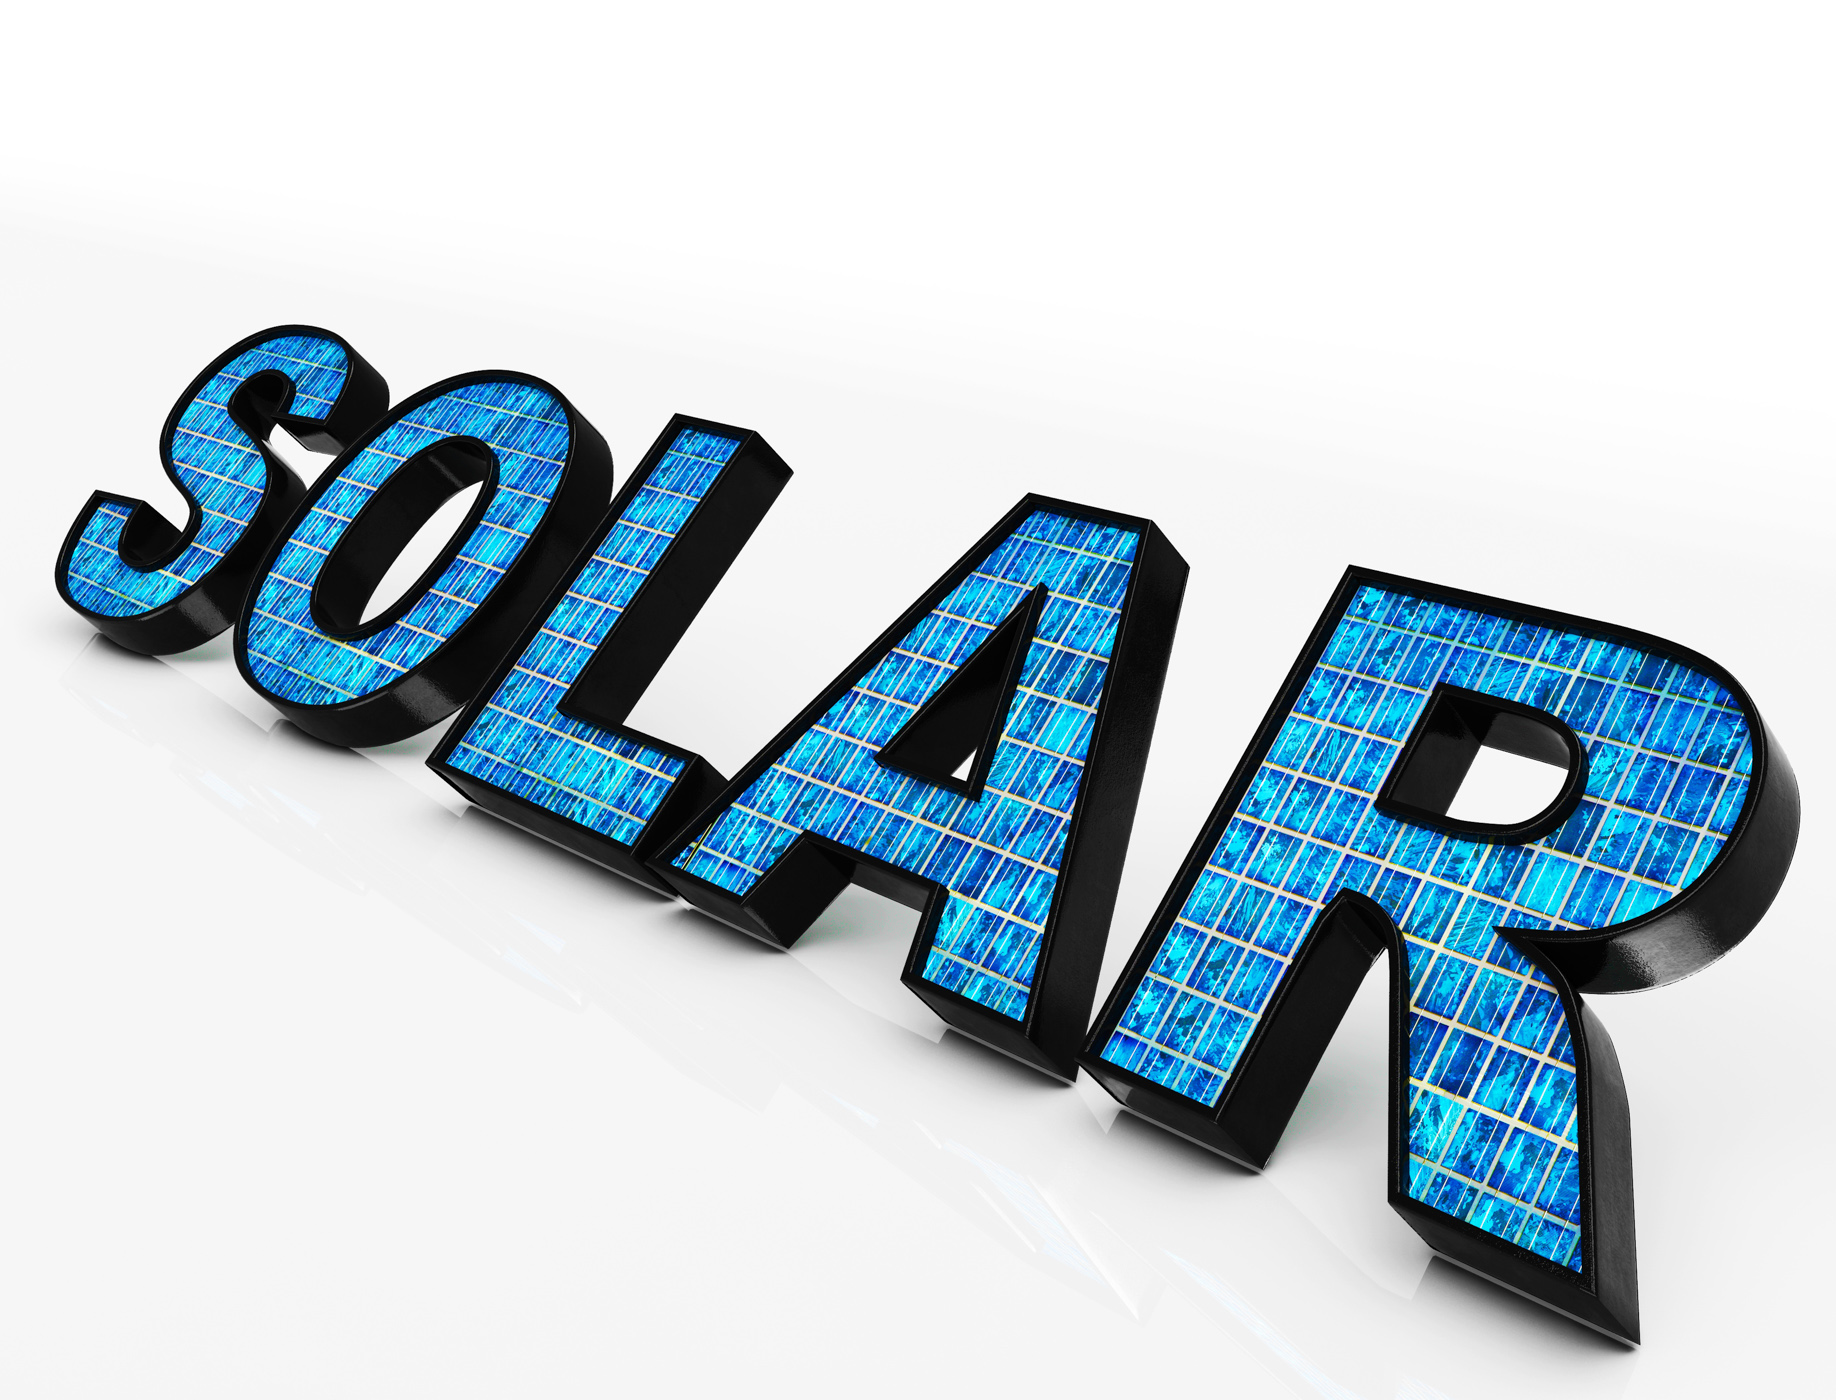 Solar word shows eco energy and sunlight photo